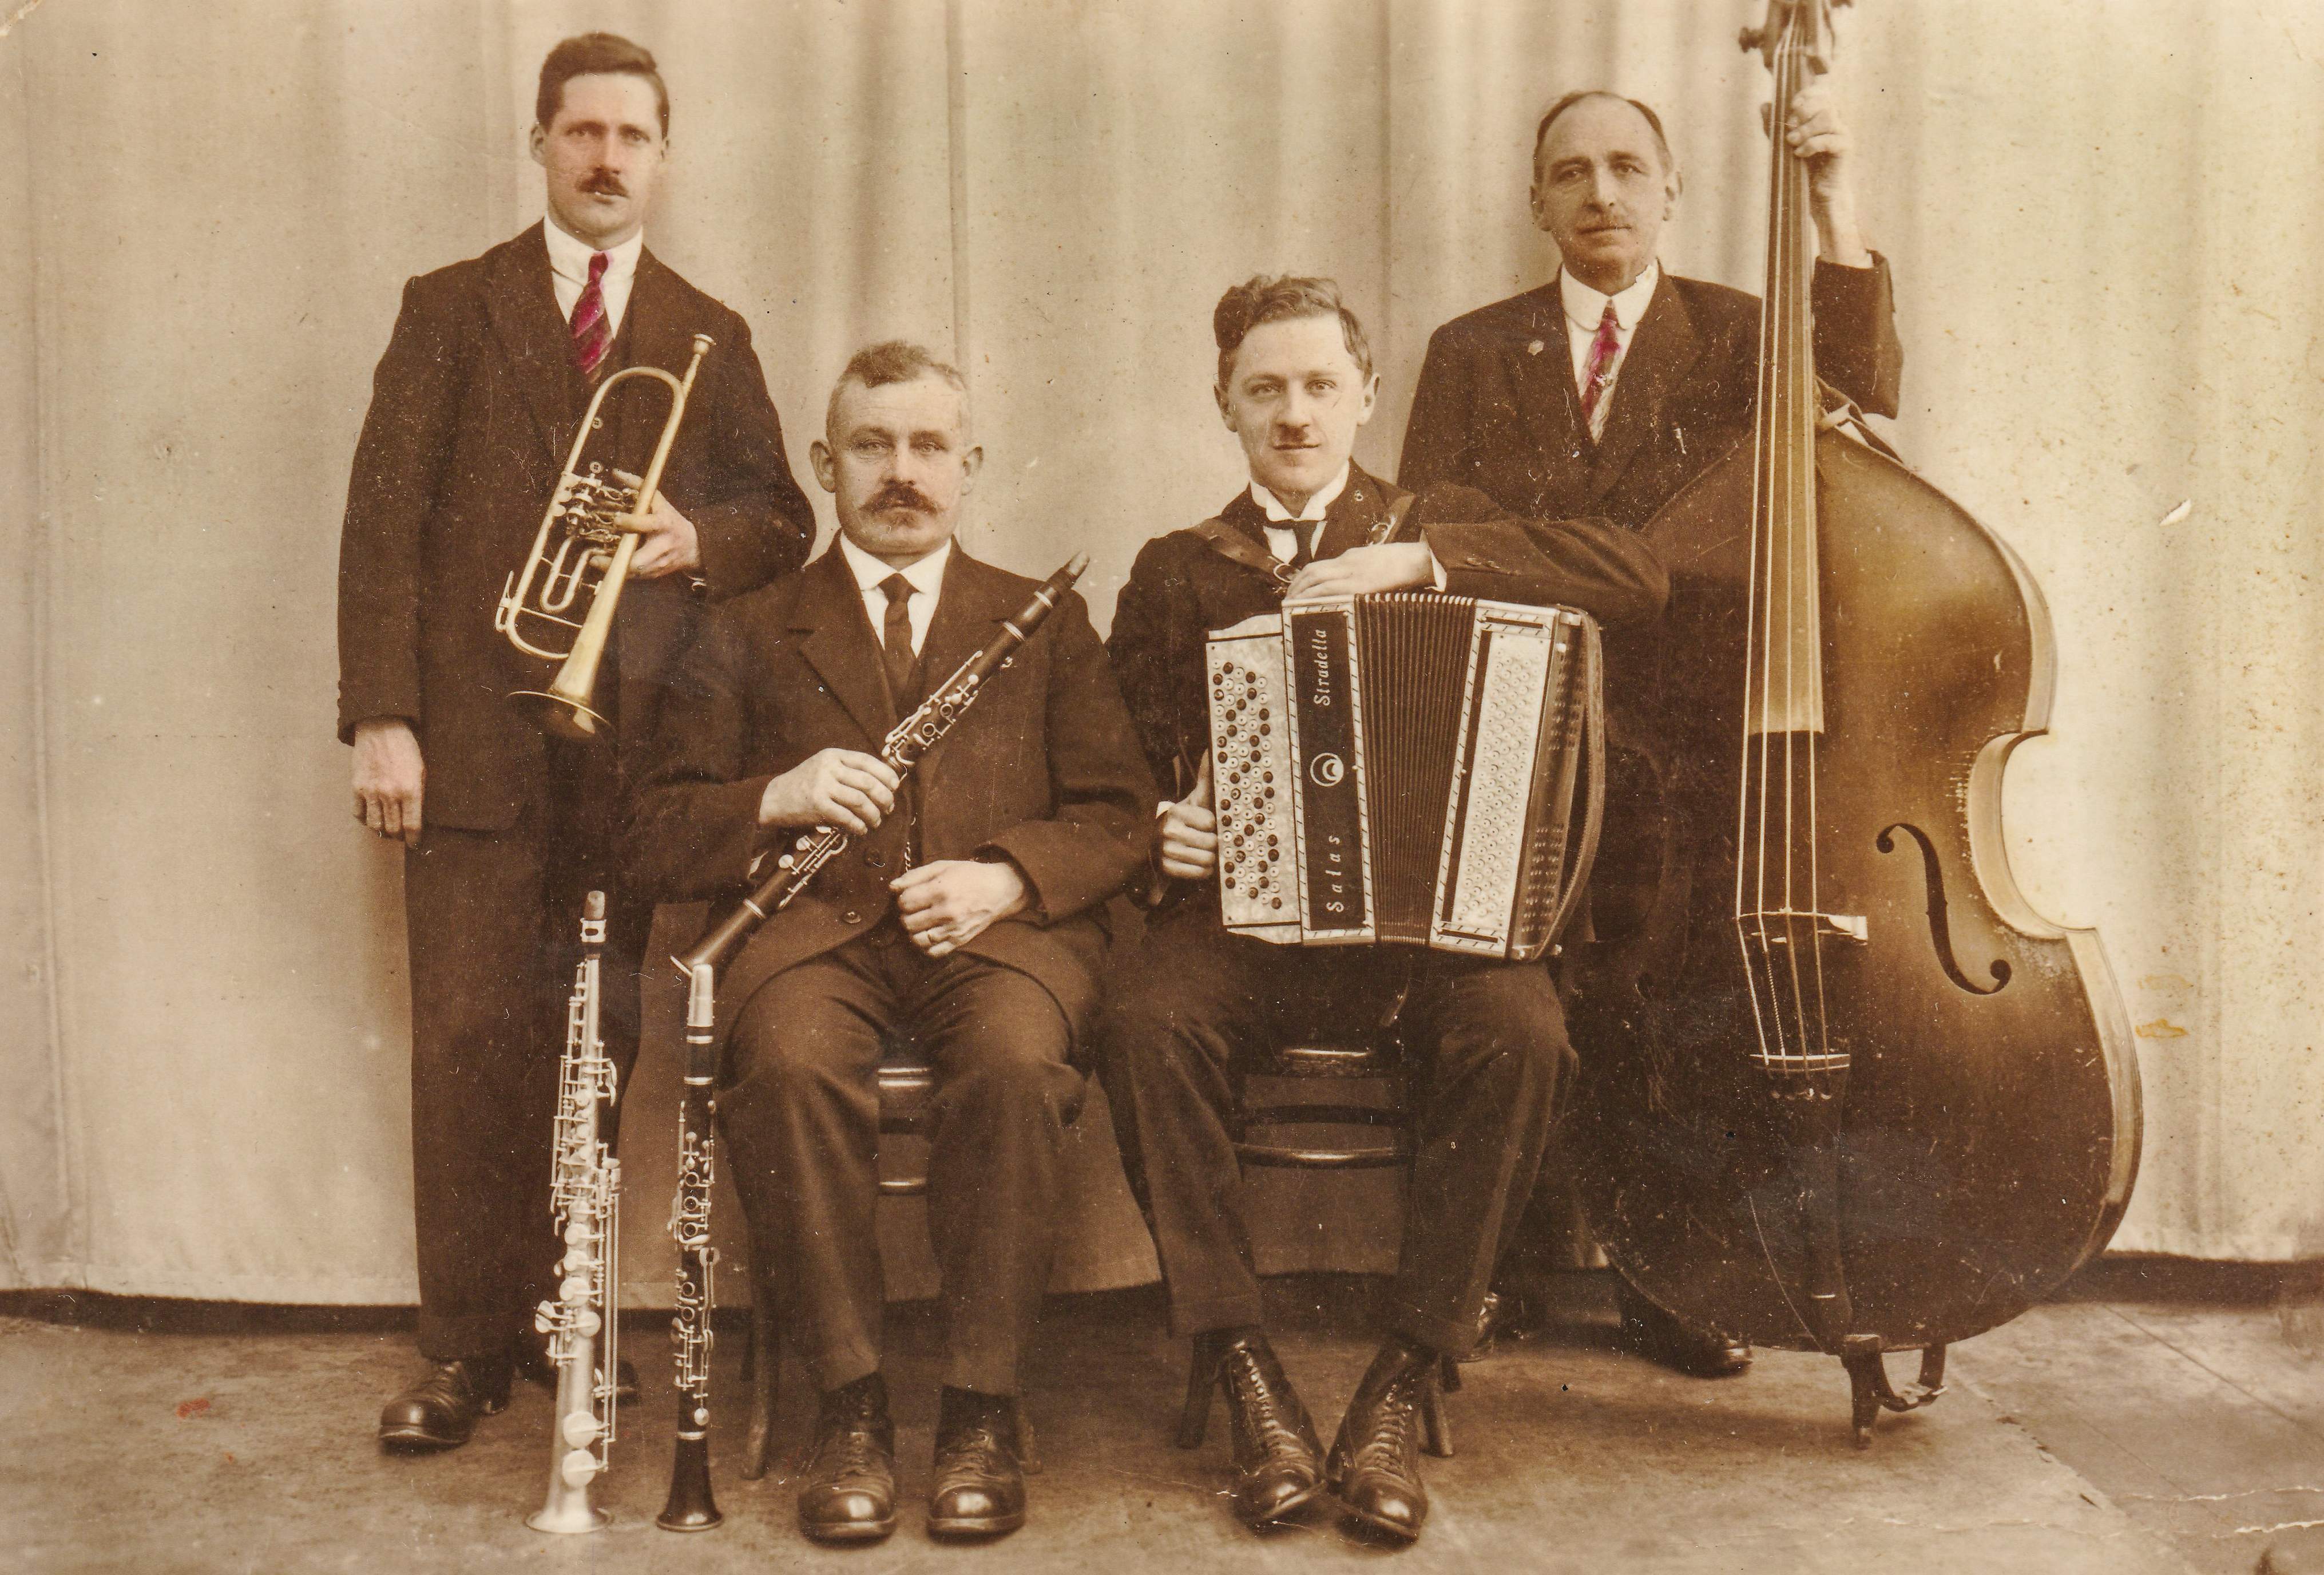 Beautiful Old Photographs - Eduard (BNID6326) and his Band